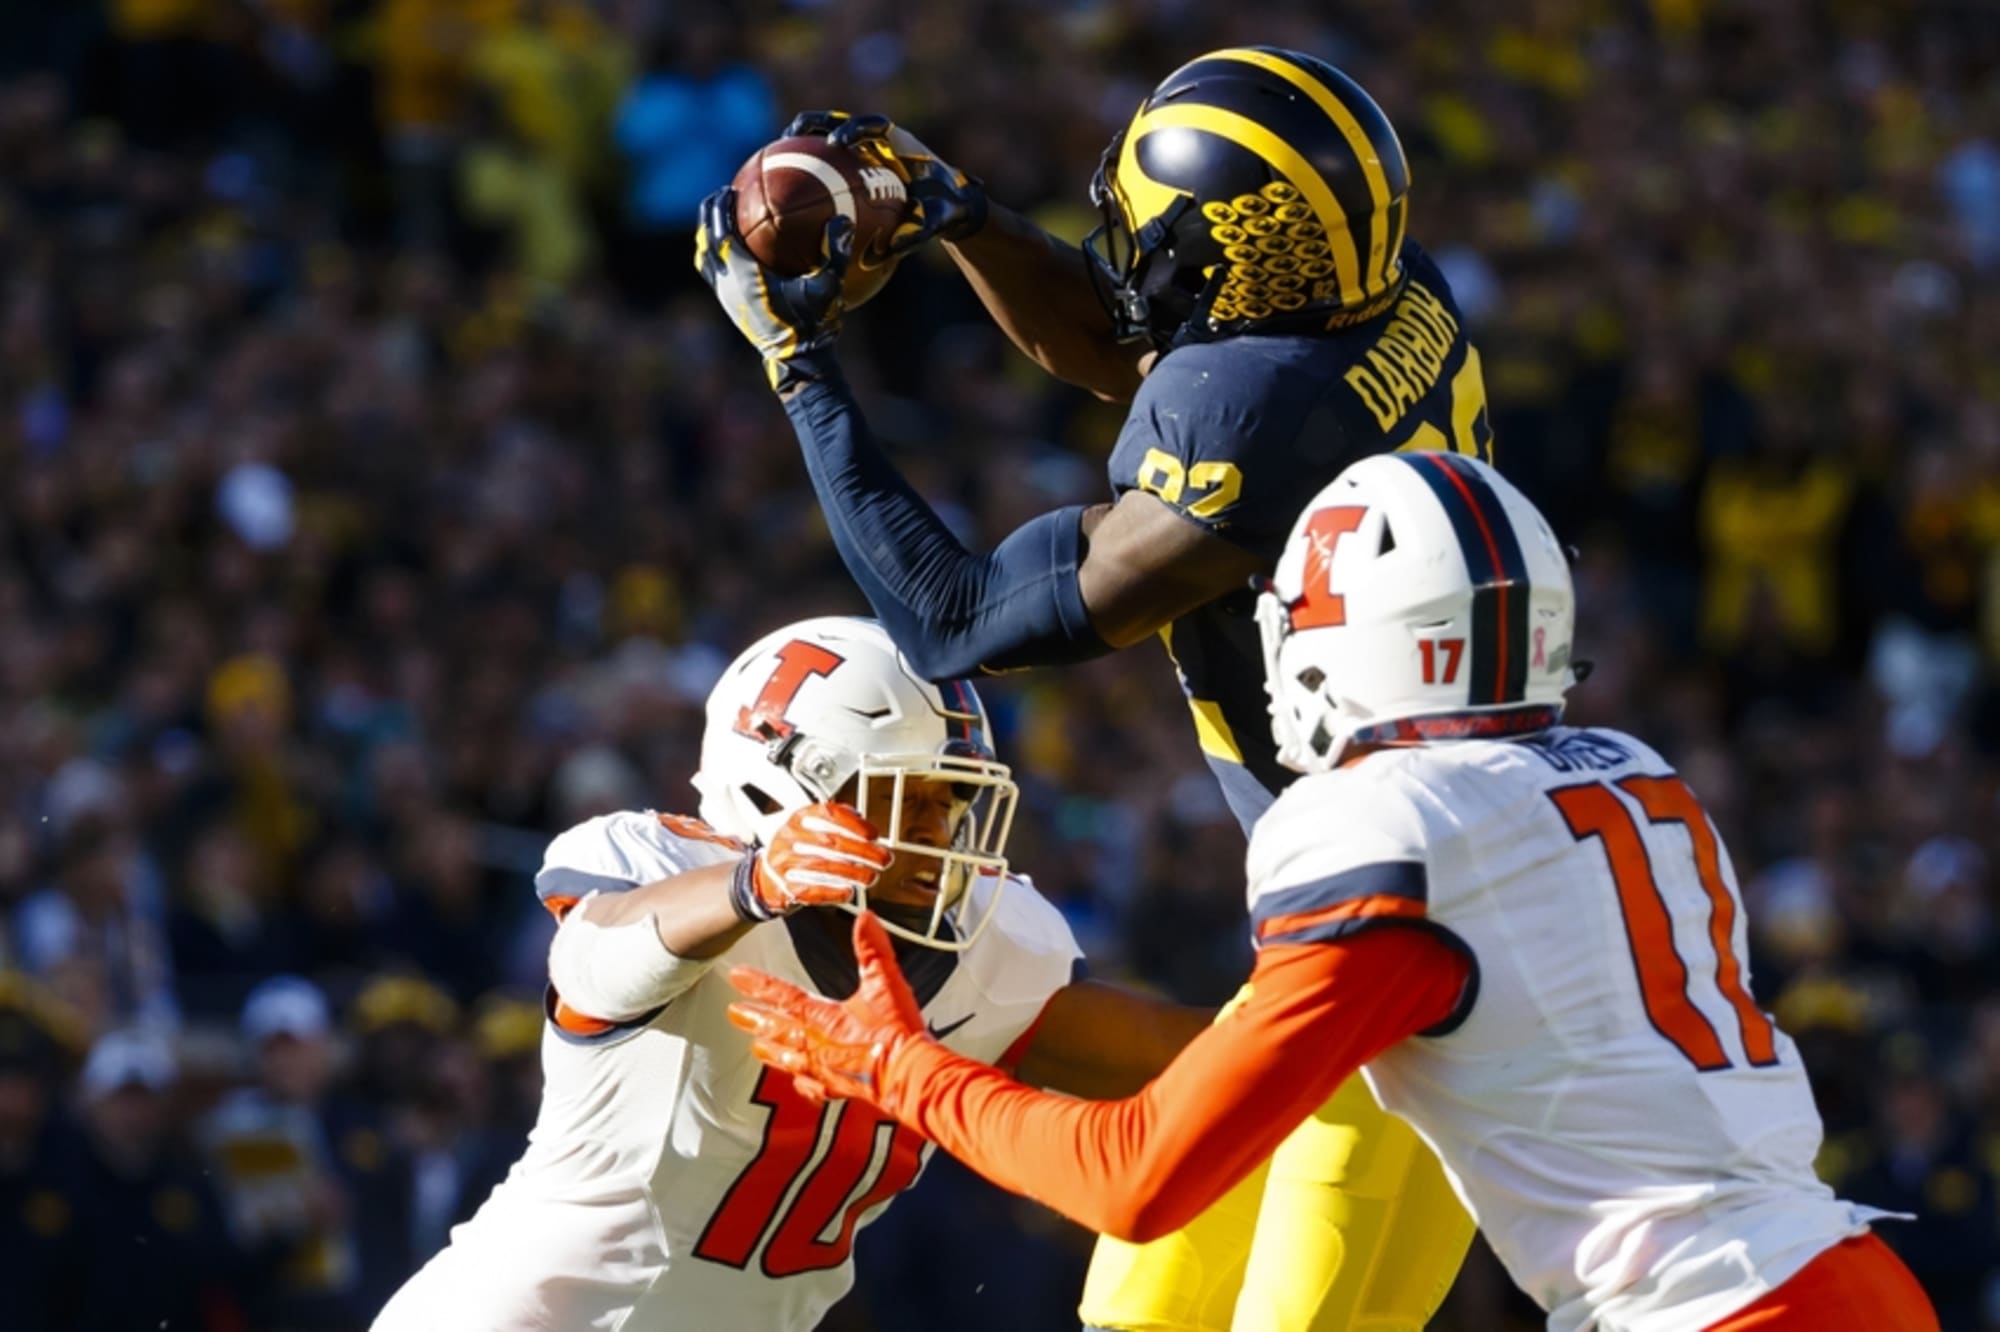 Michigan Football vs Illinois 3 Takeaways from the Wolverines Win